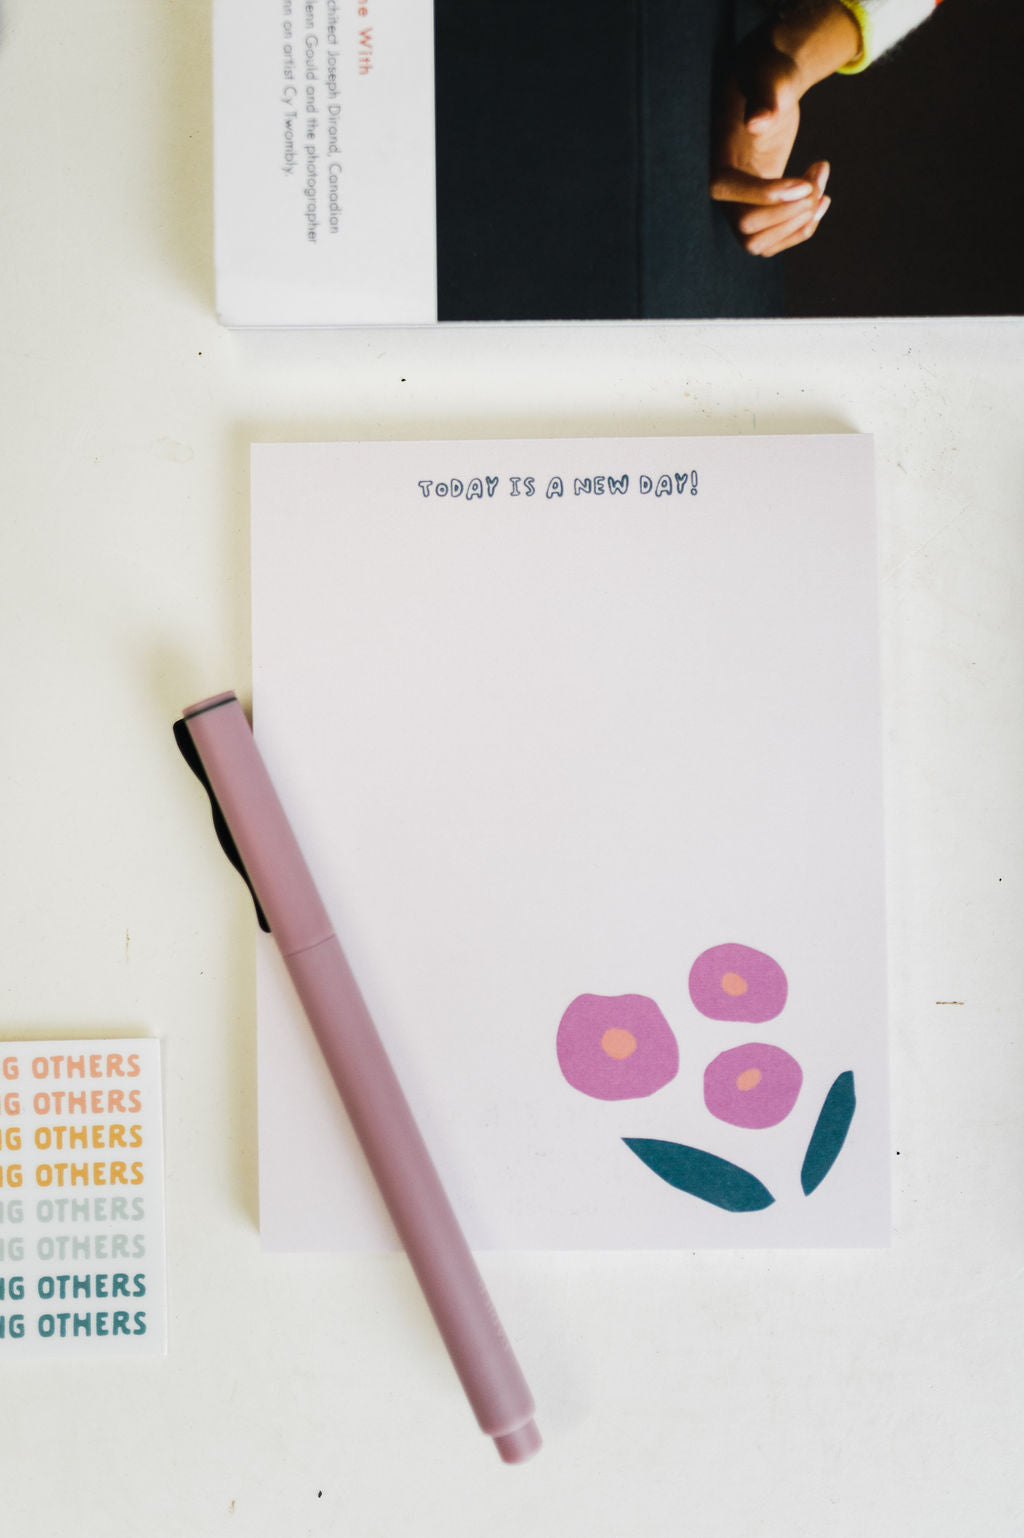 today is a new day | notepad by ramble & co